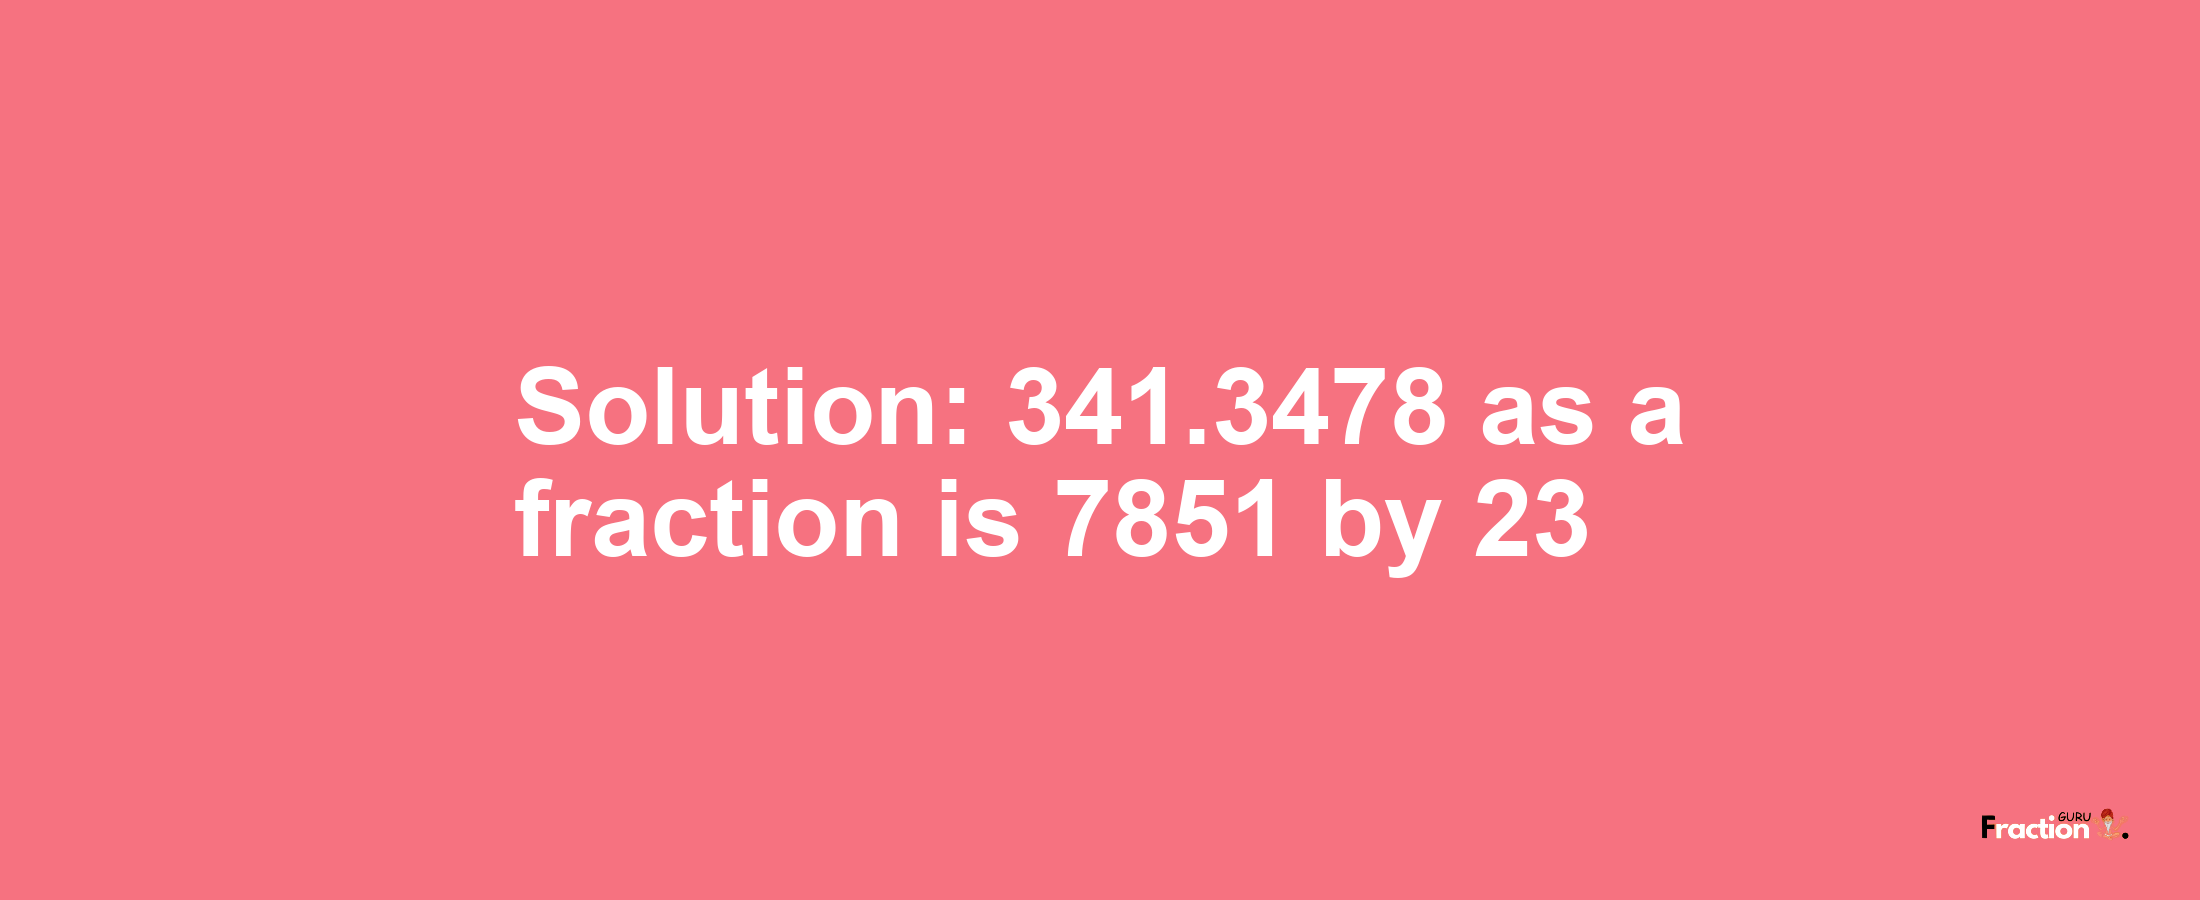 Solution:341.3478 as a fraction is 7851/23